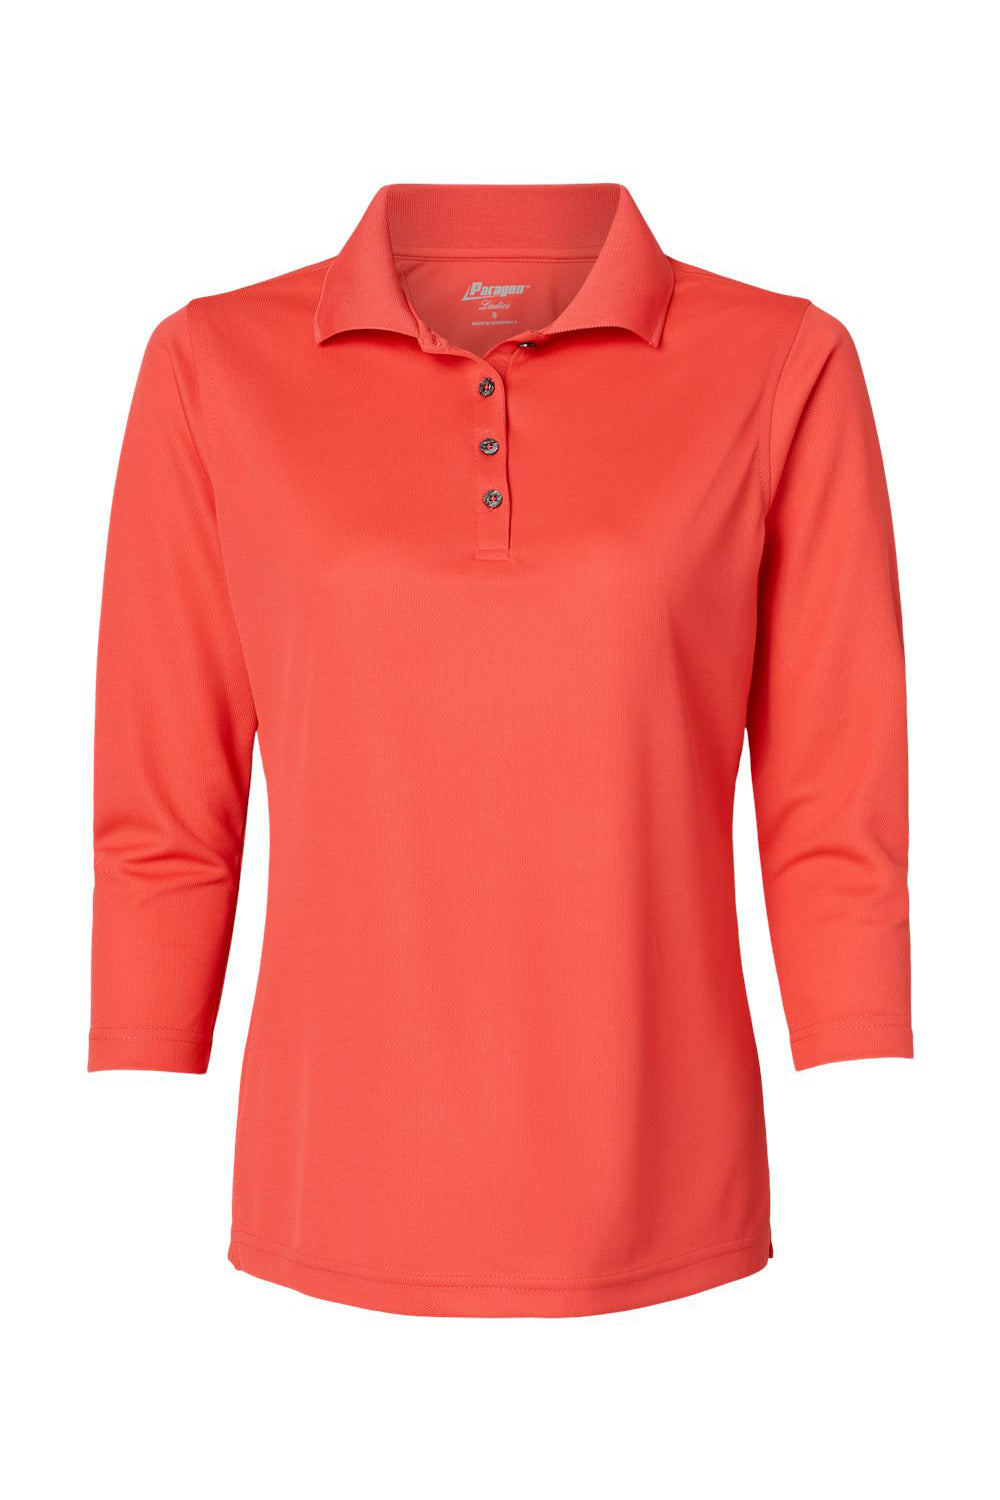 Paragon 120 Womens Lady Palm 3/4 Sleeve Polo Shirt Melon Flat Front